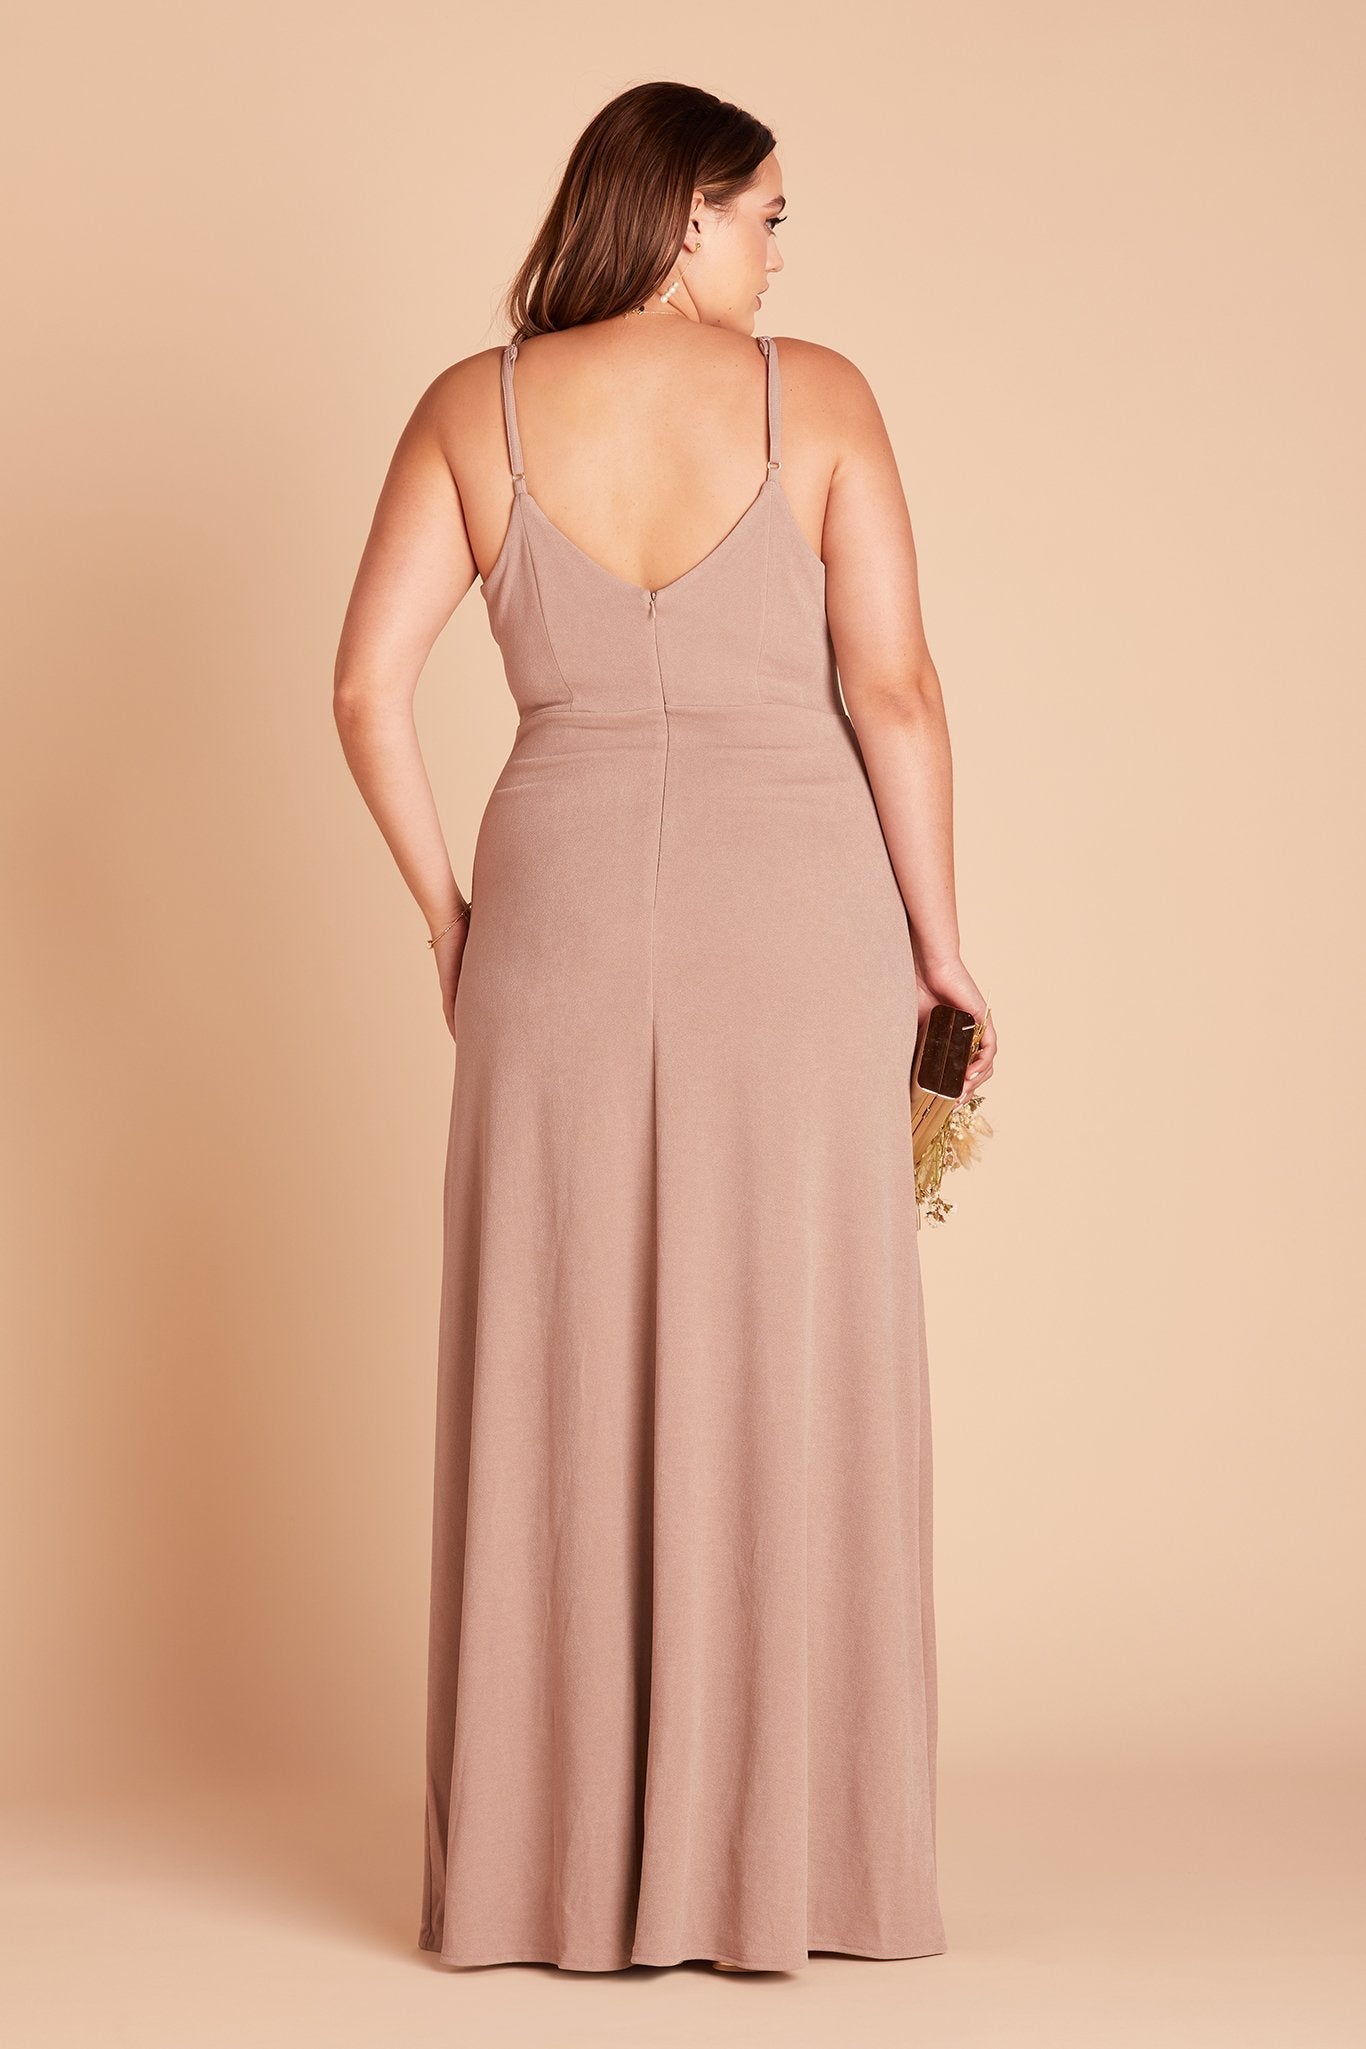 Jay plus size bridesmaid dress with slit in taupe crepe by Birdy Grey, back view